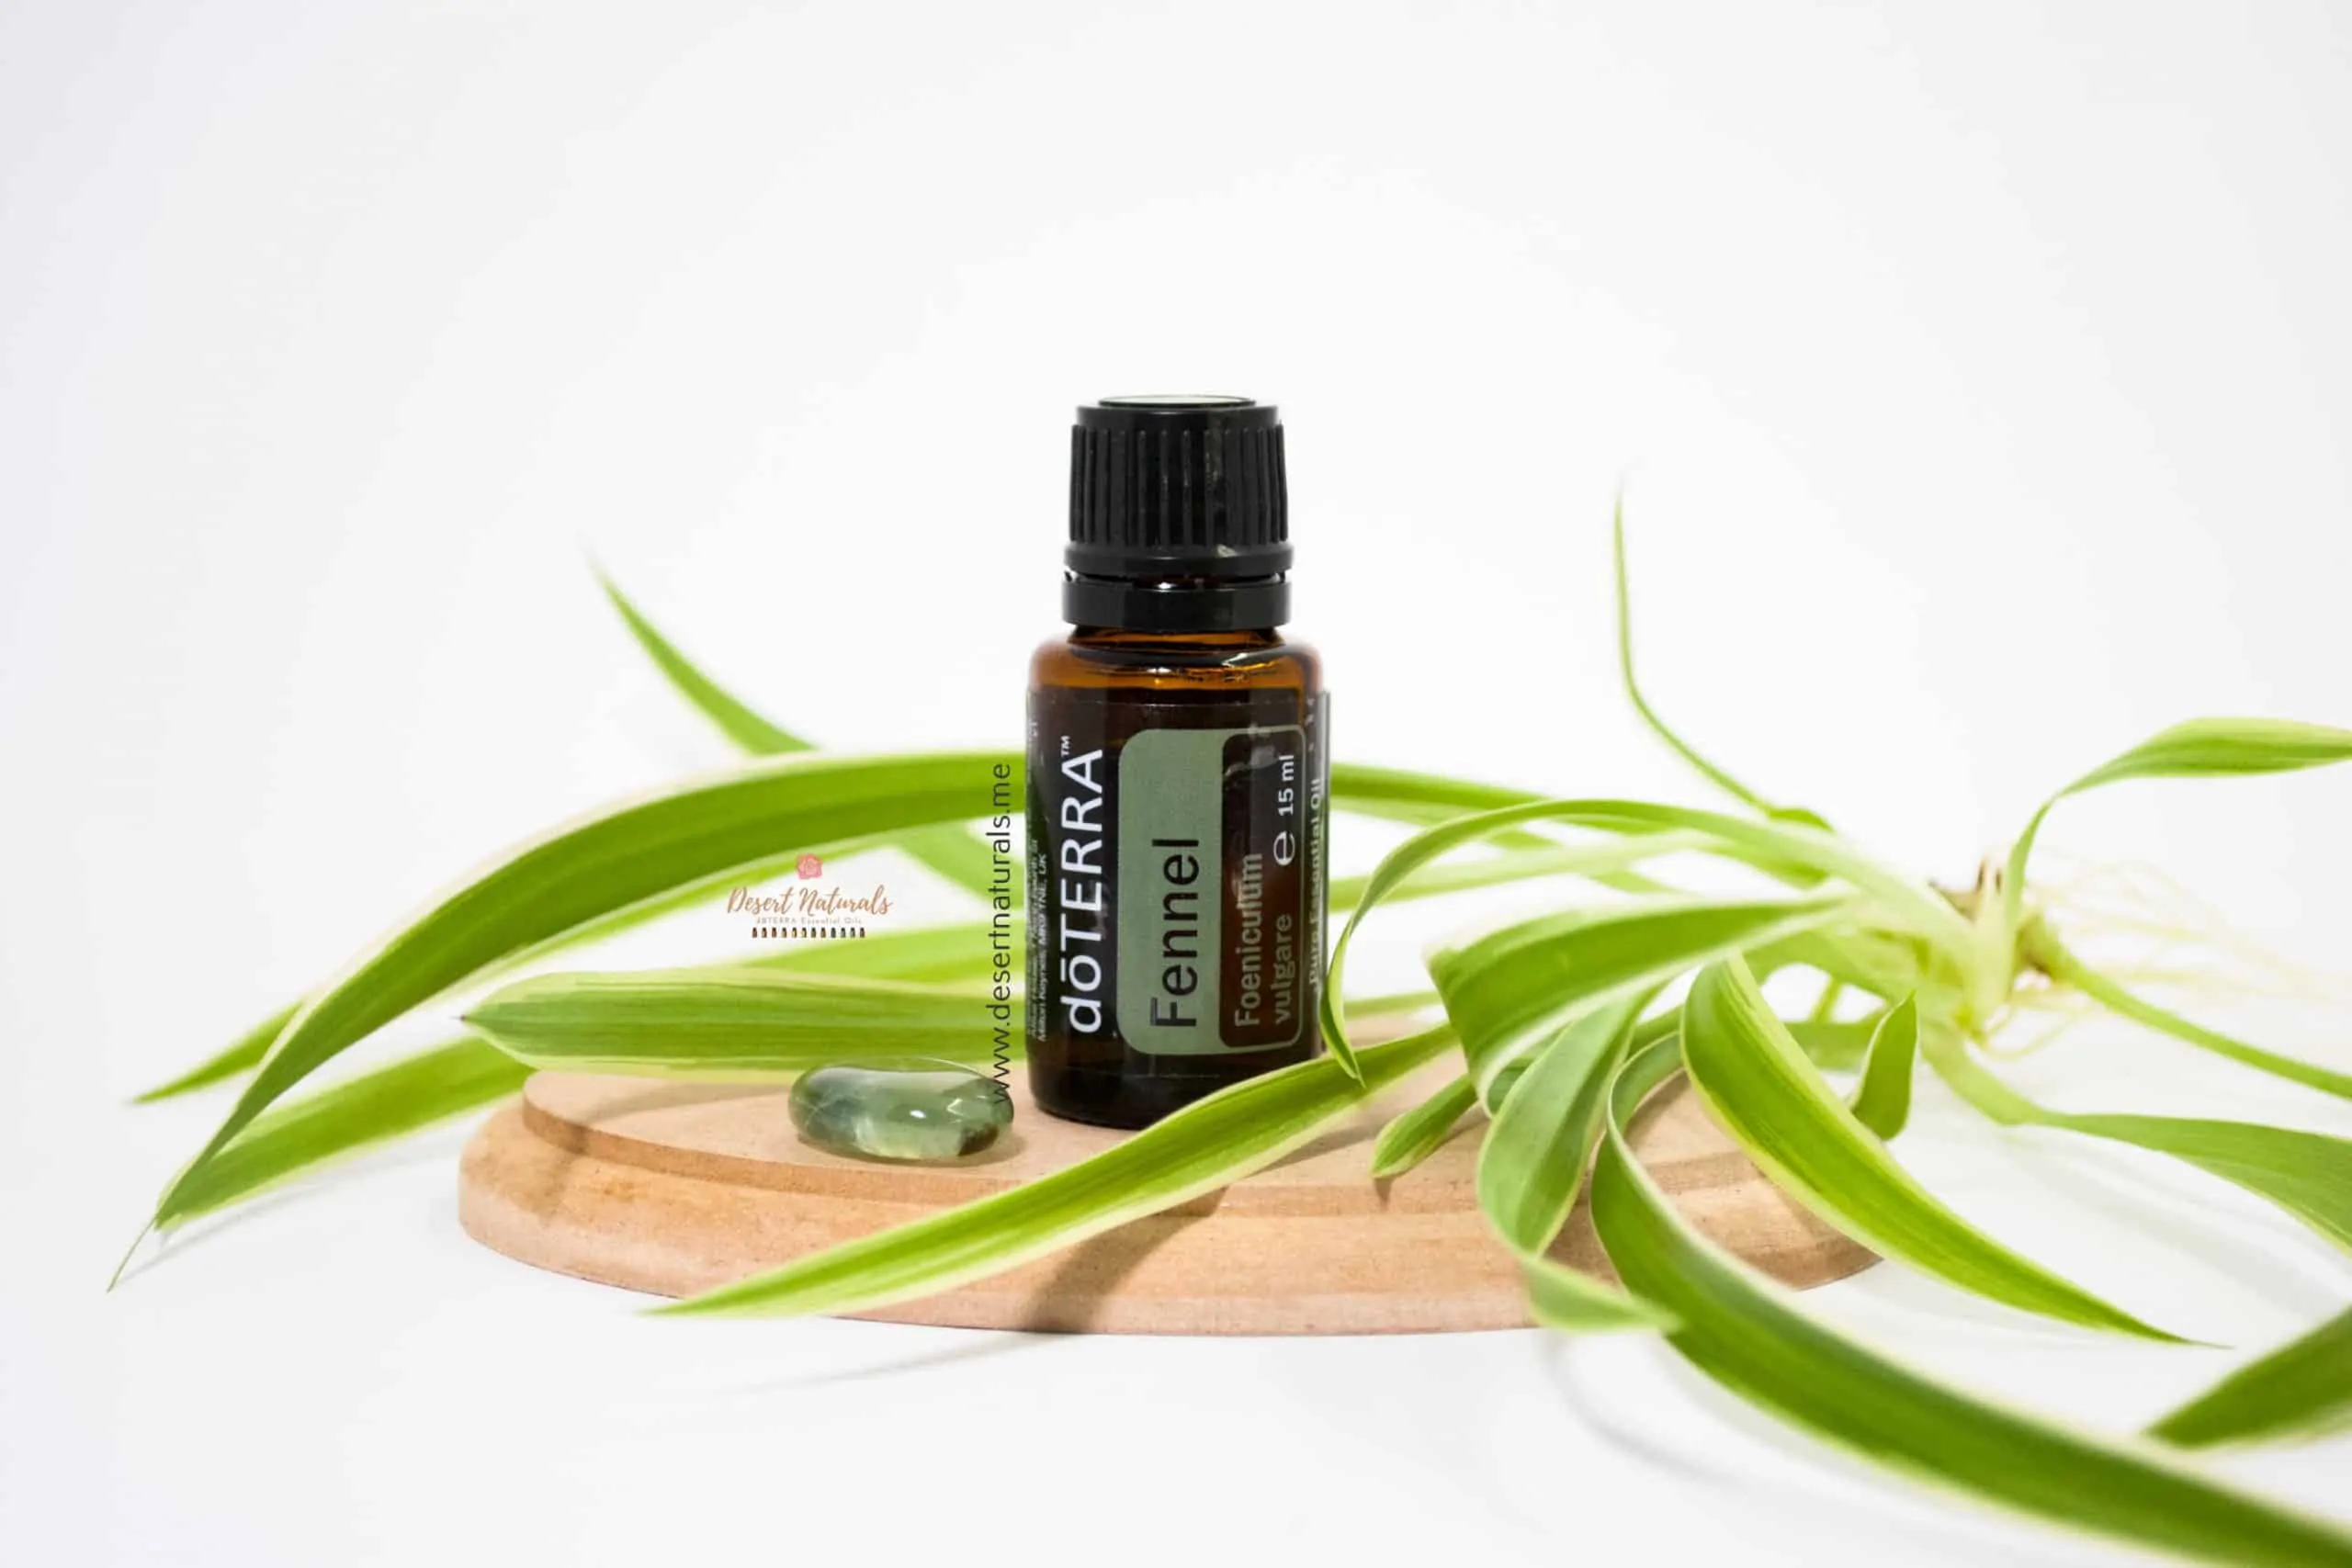 Fennel essential oil from doTERRA can help with digestion and weight loss